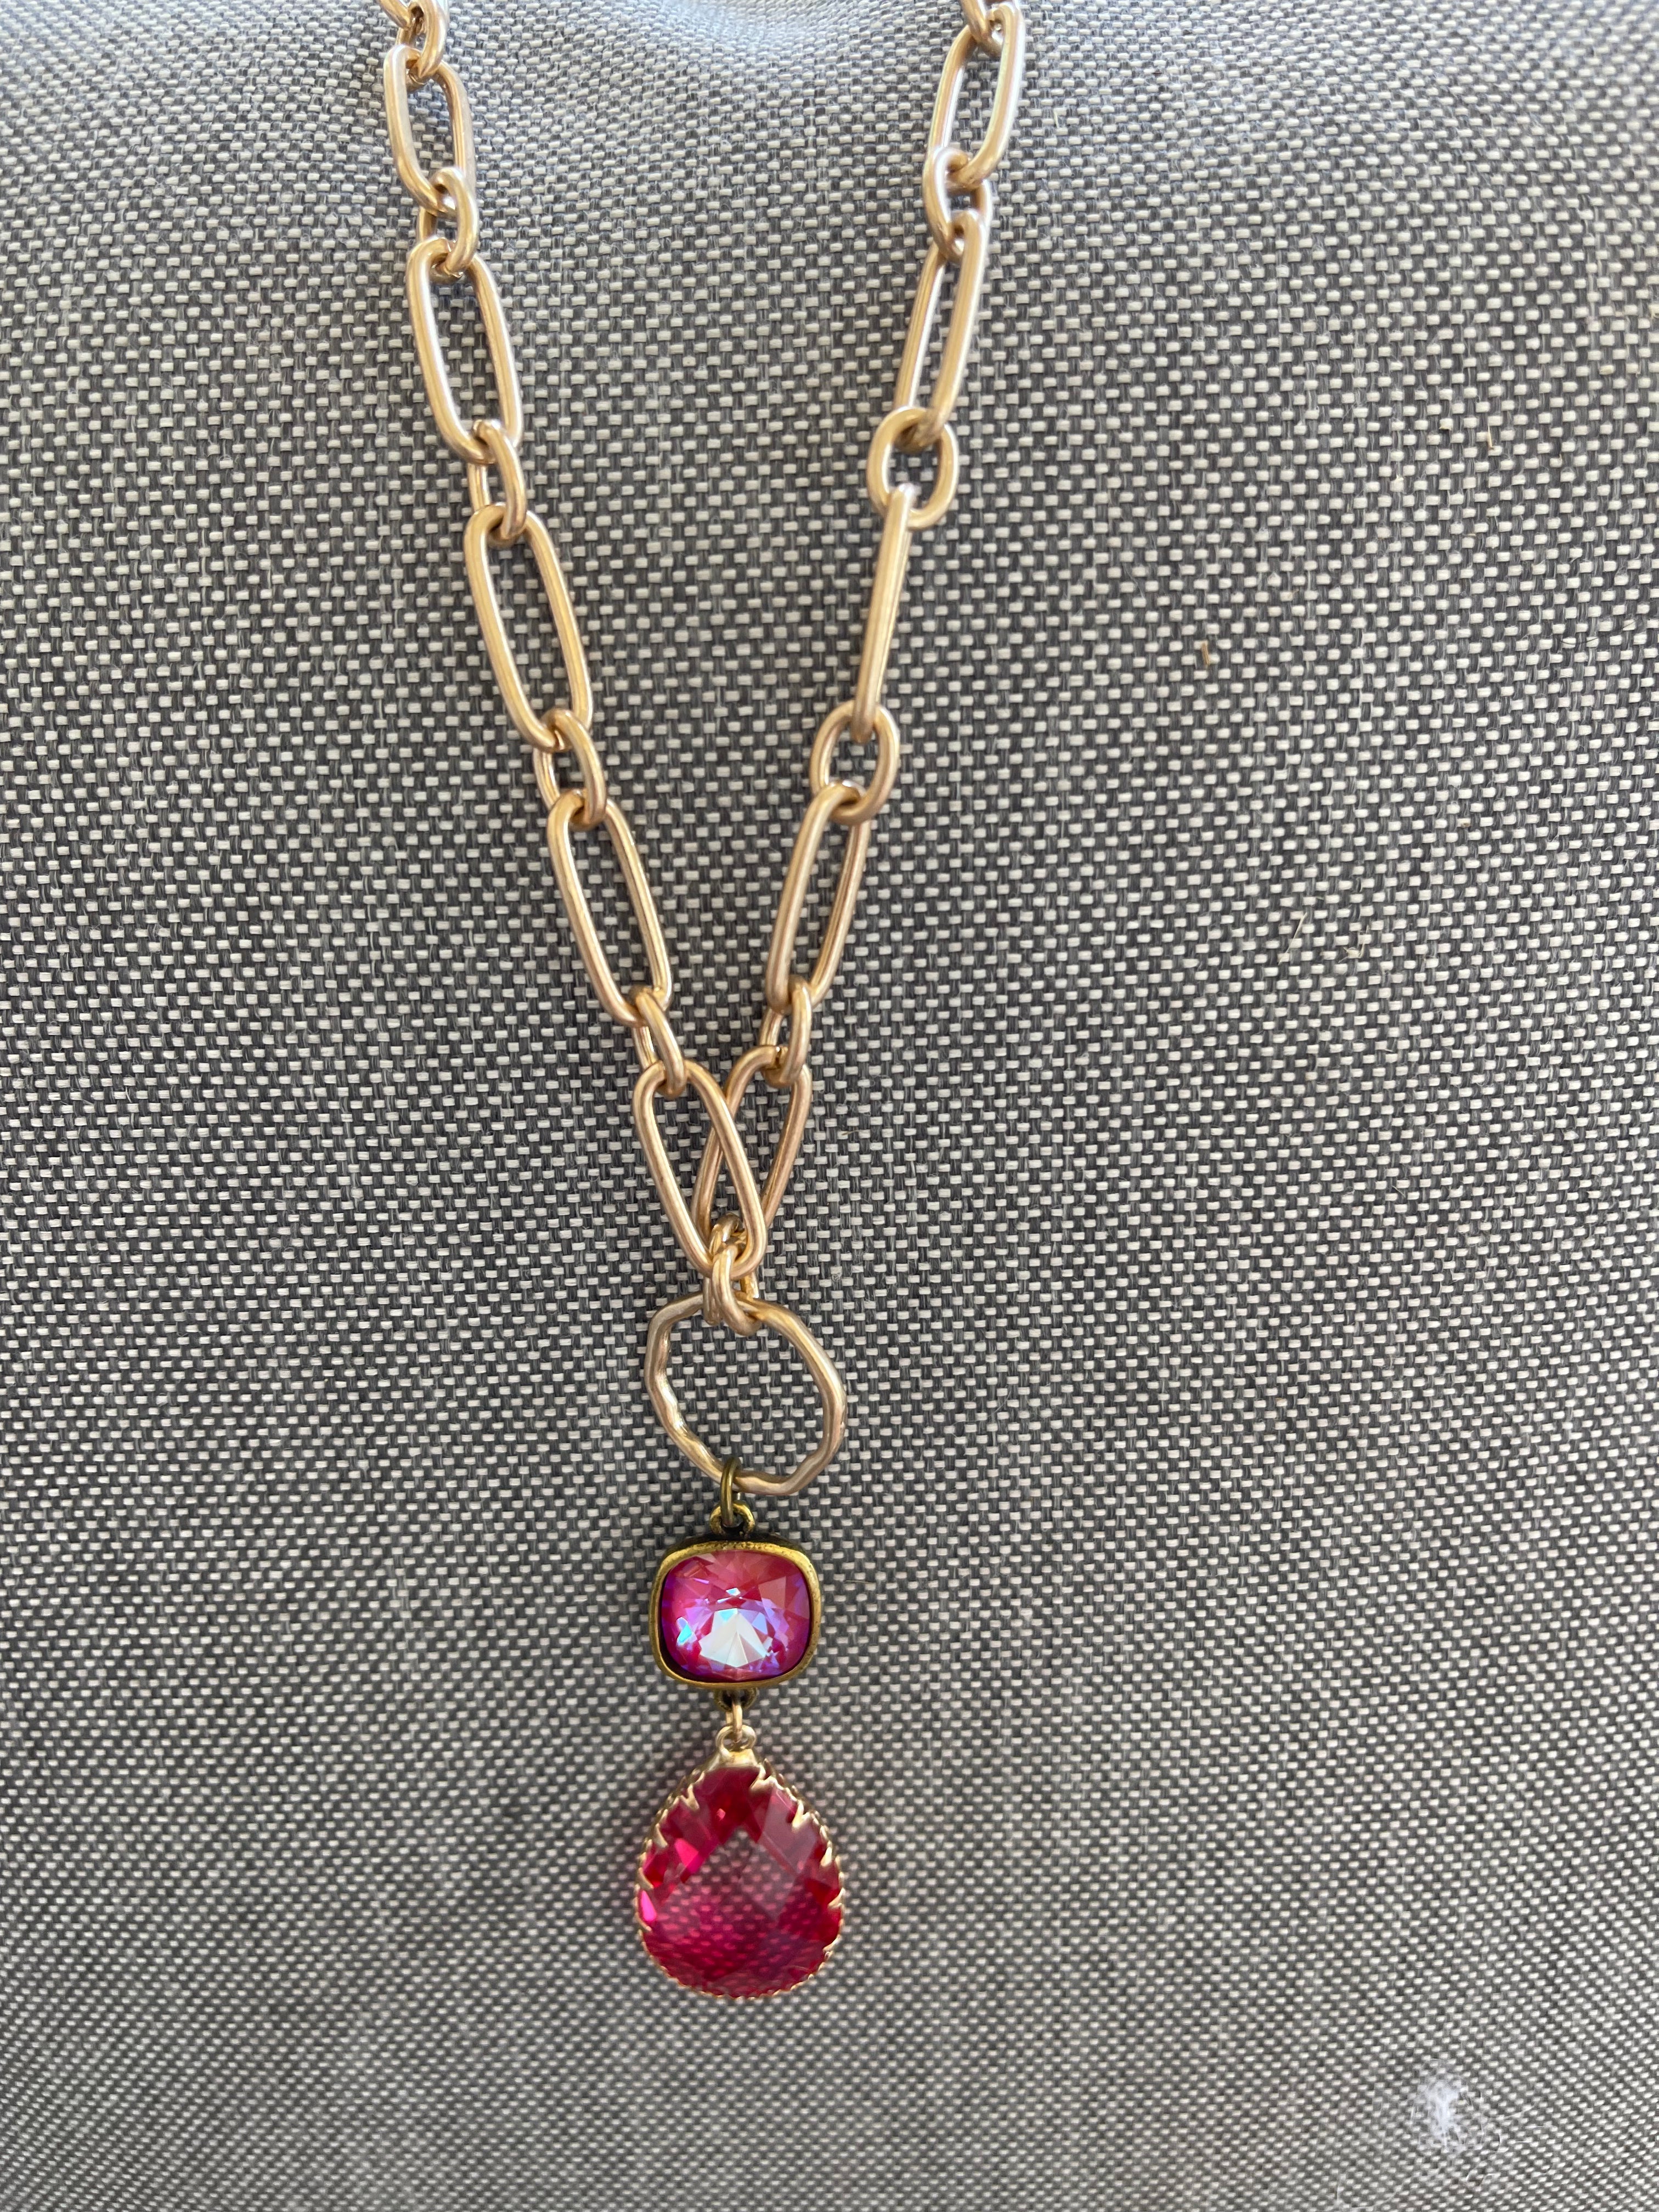 Pink Panache Gold Link Necklace with Large Pink Stones